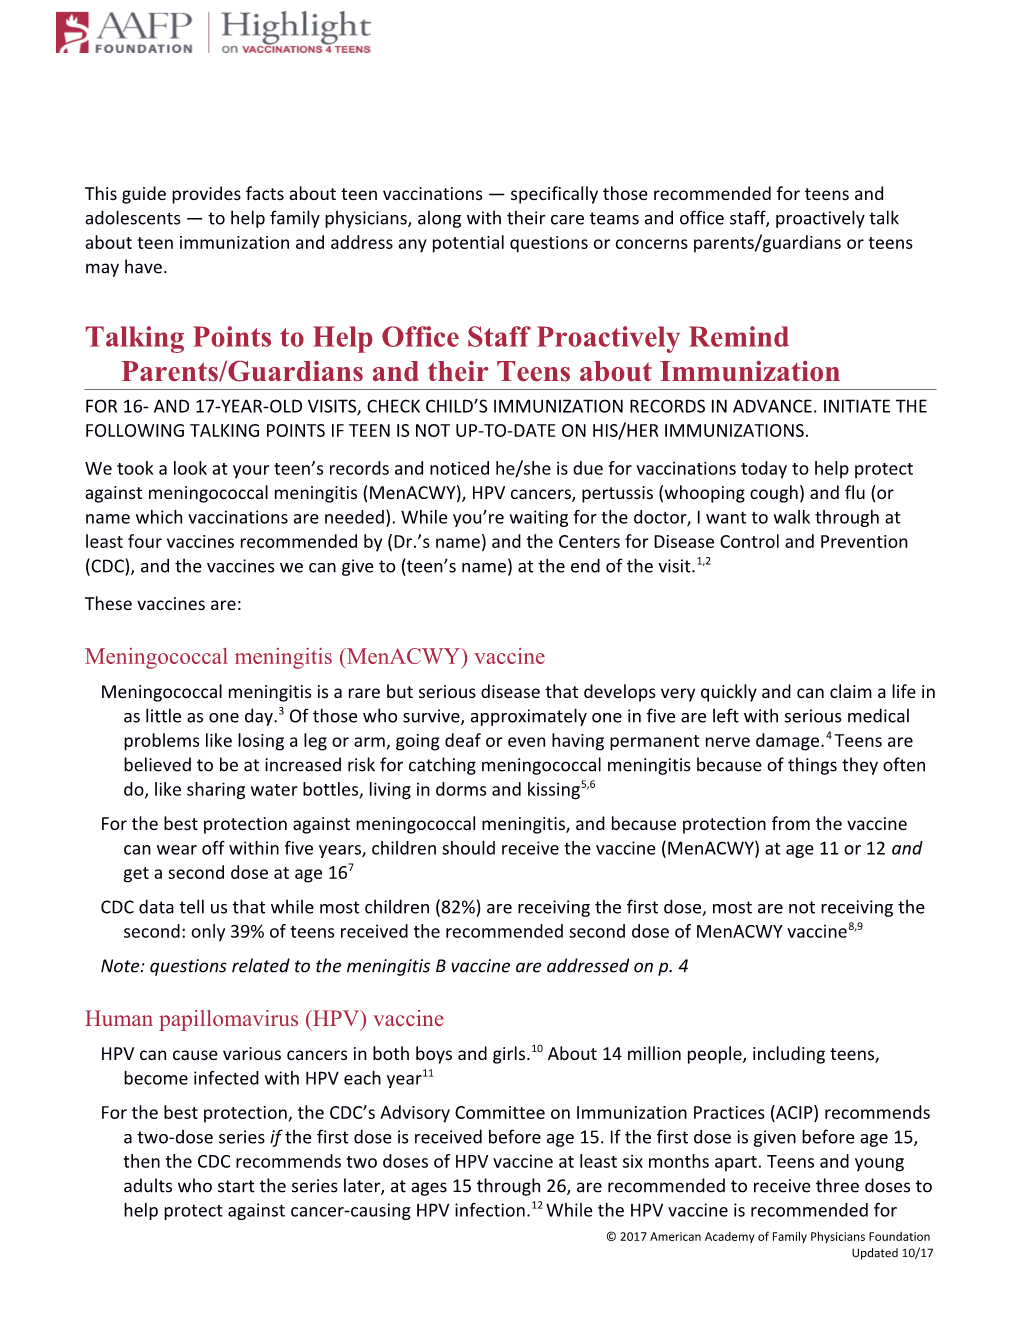 Talking Points to Help Office Staff Proactively Remind Parents/Guardians and Their Teens